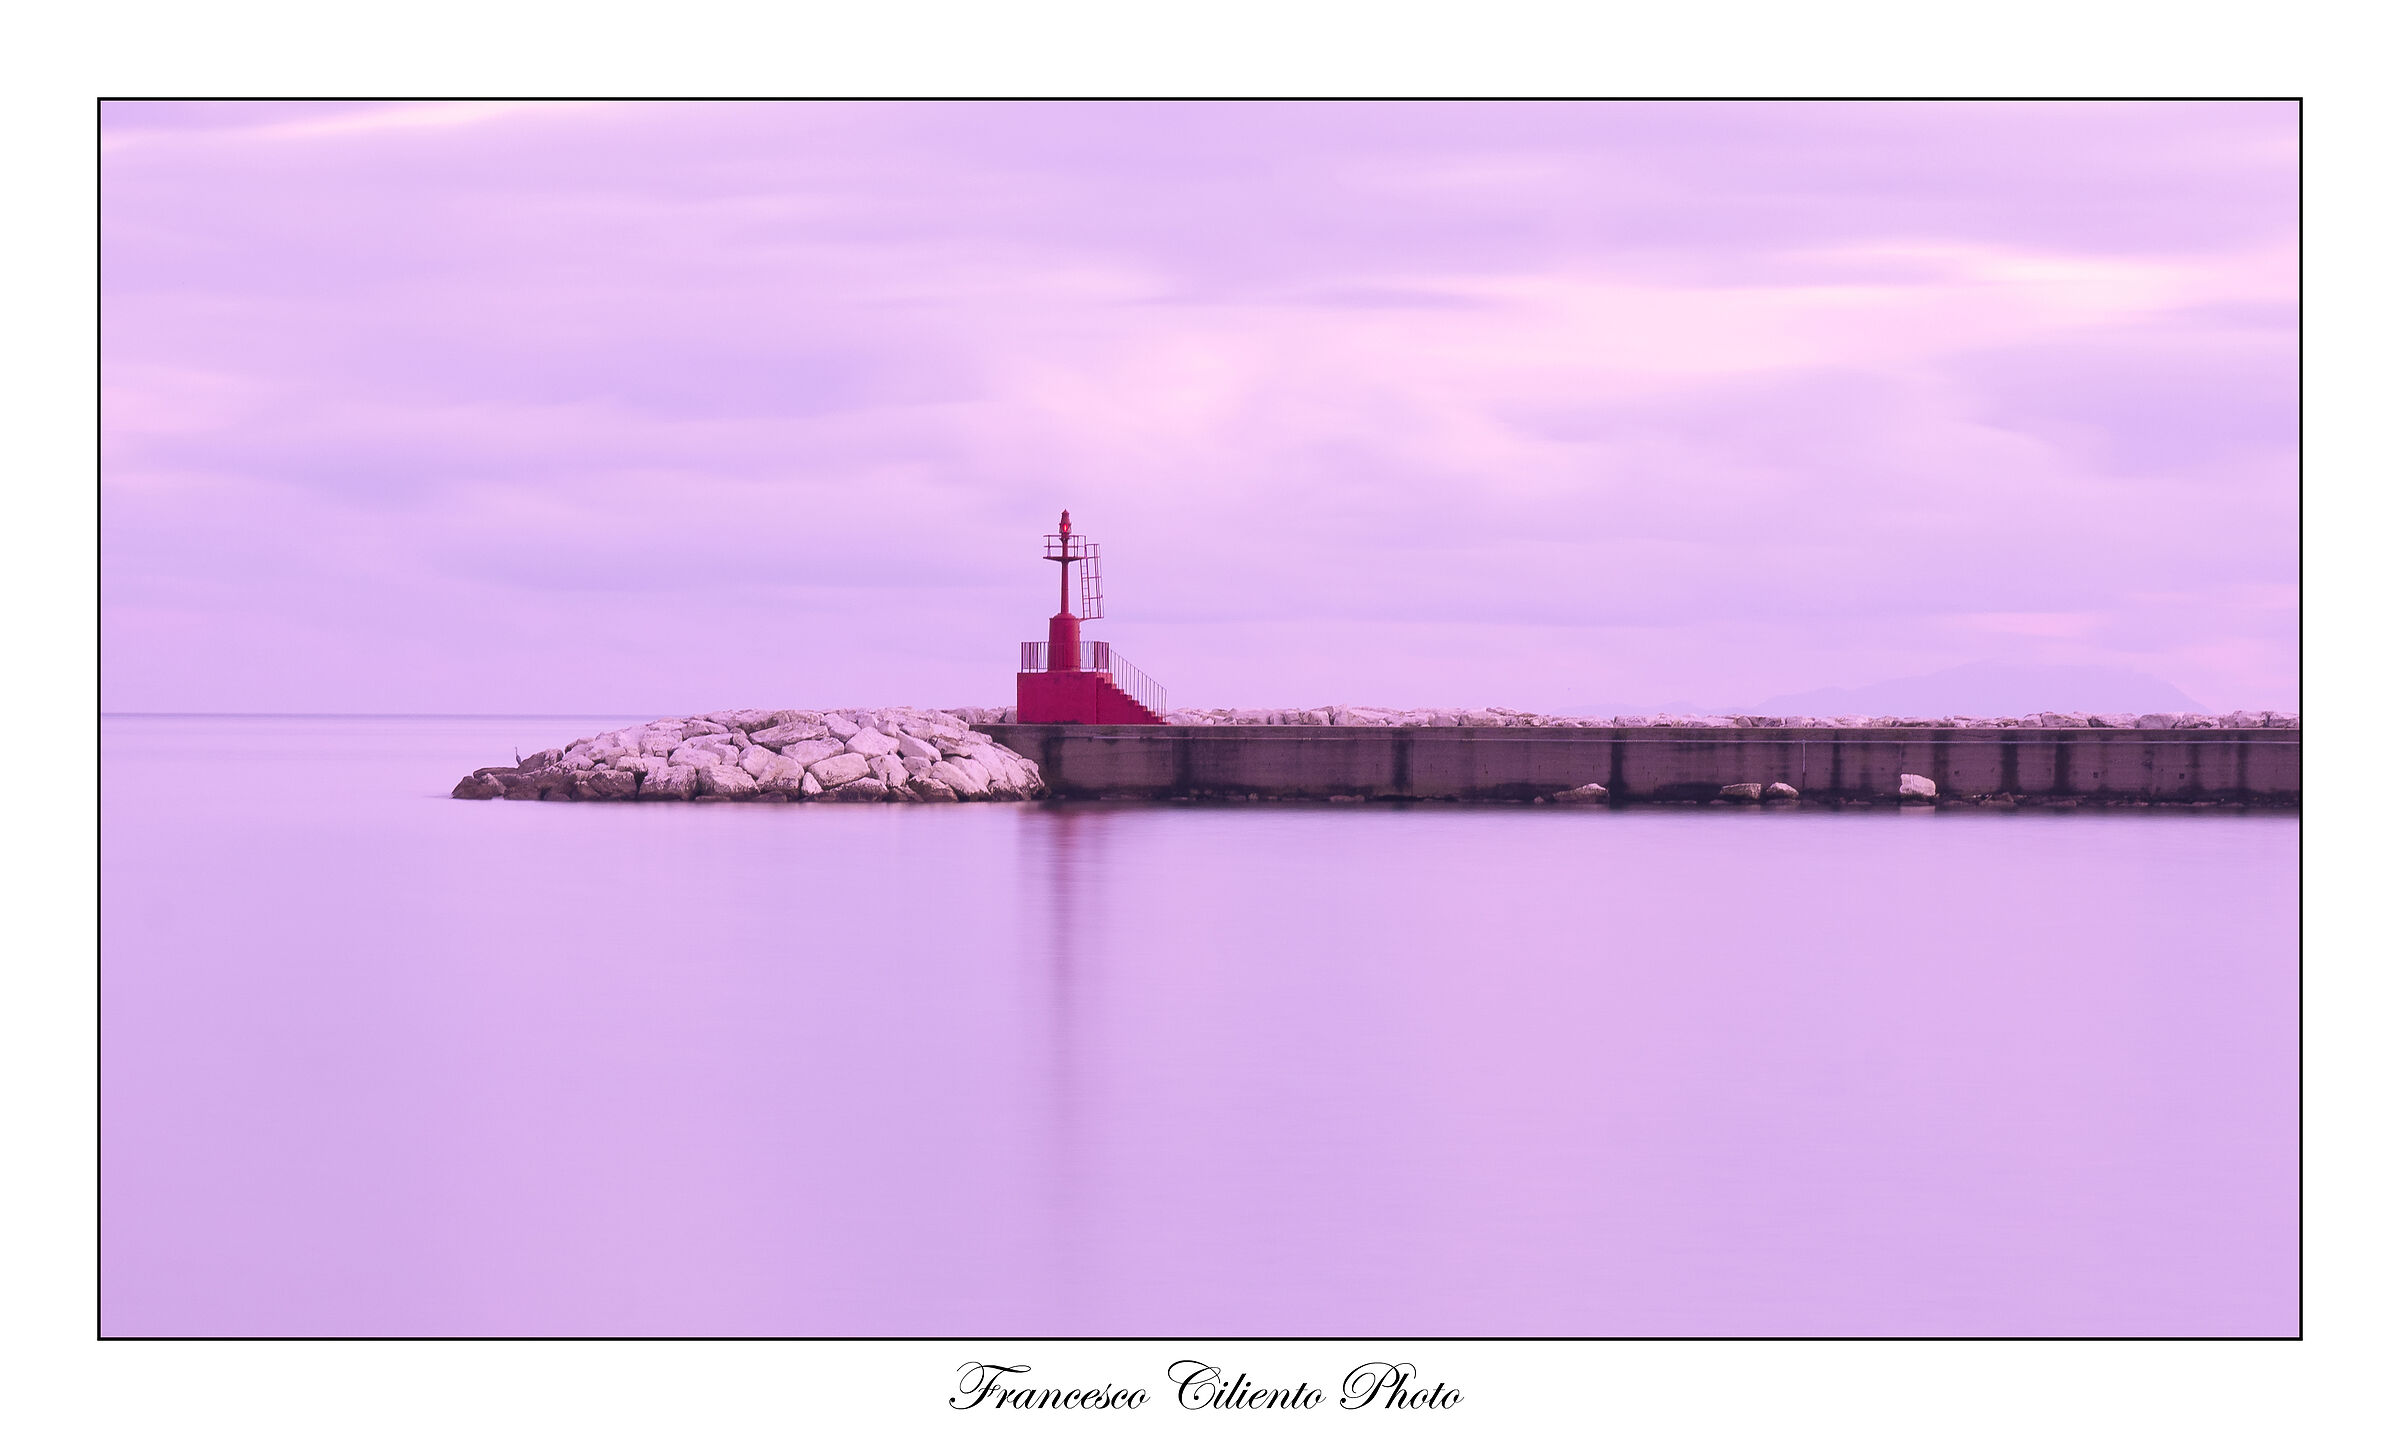 Little Lighthouse on the Port of Formia....